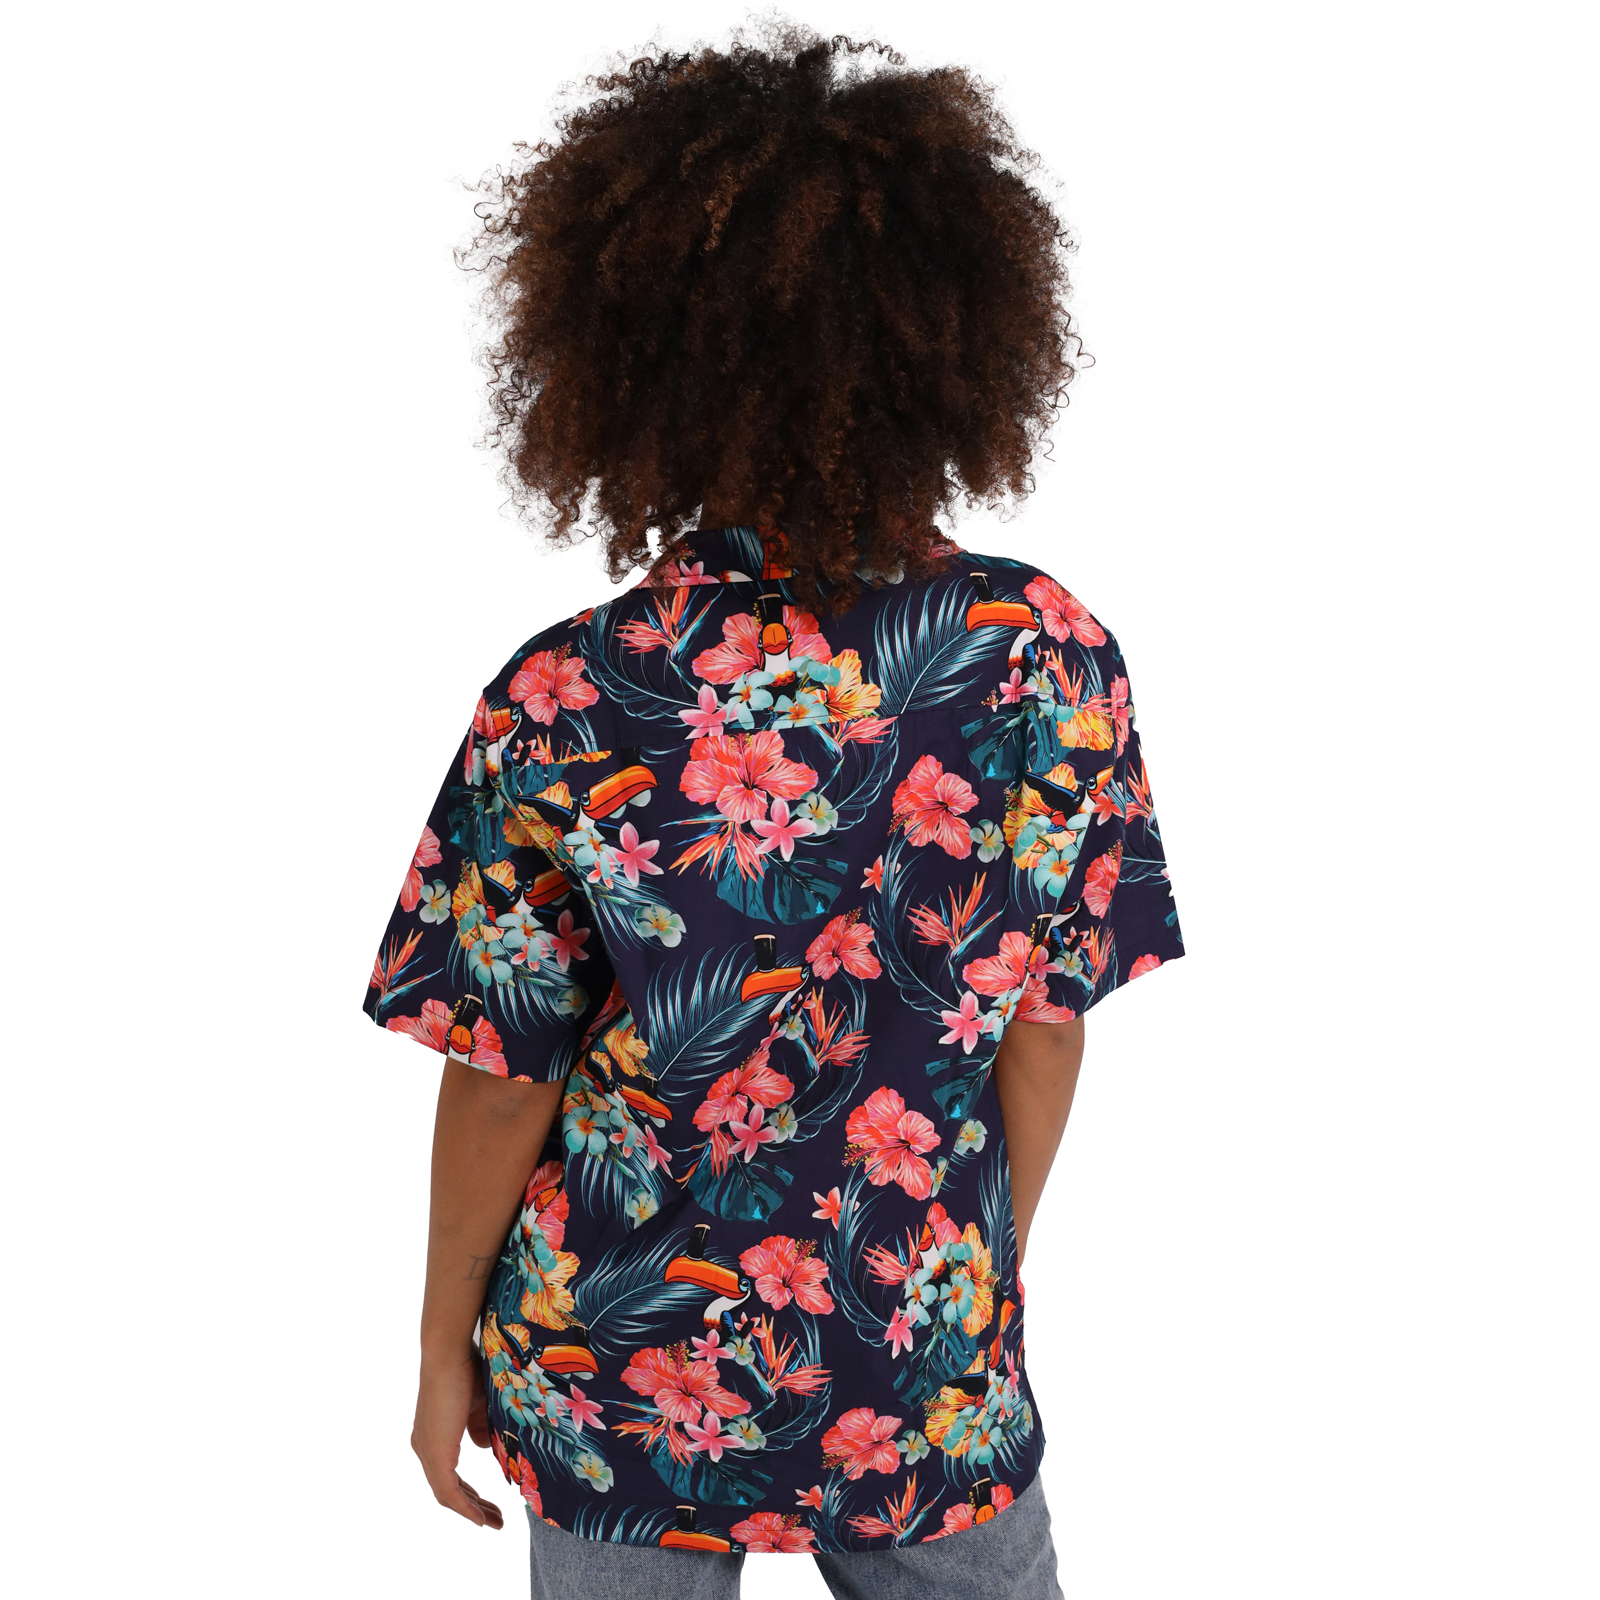 Person with curly hair wearing a Guinness Toucan Hawaiian Shirt, photographed from behind against a white background.